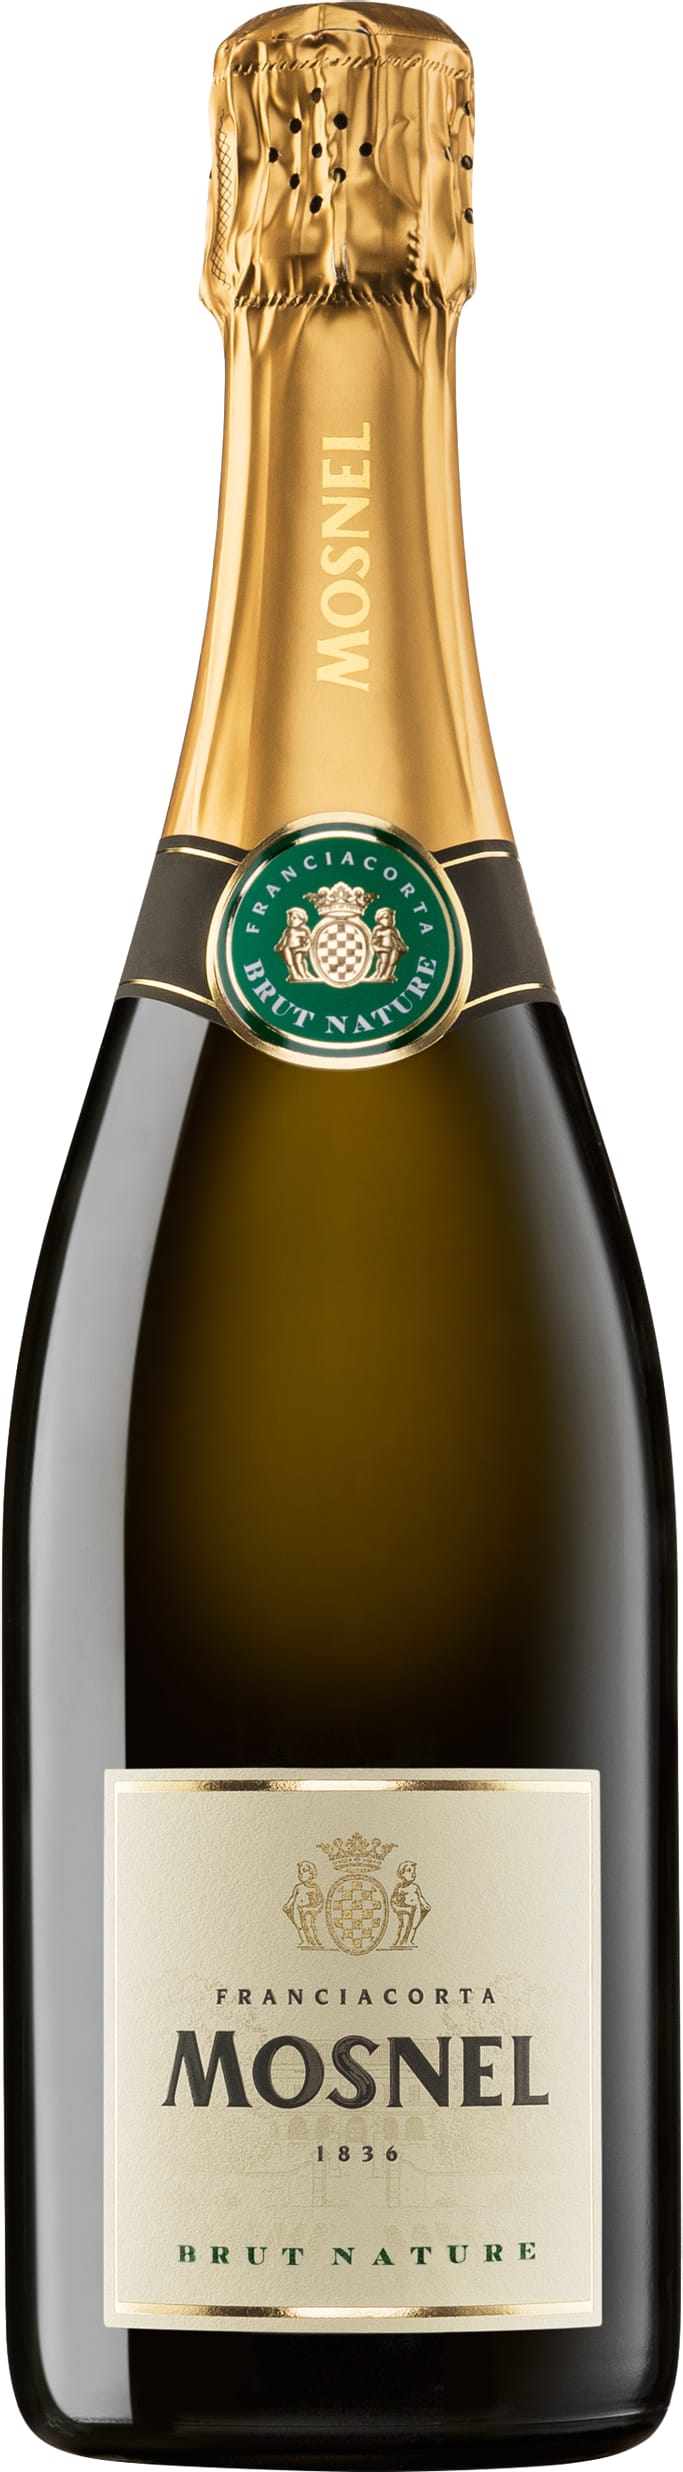 Mosnel Franciacorta Brut Nature Organic 75cl NV - Buy Mosnel Wines from GREAT WINES DIRECT wine shop